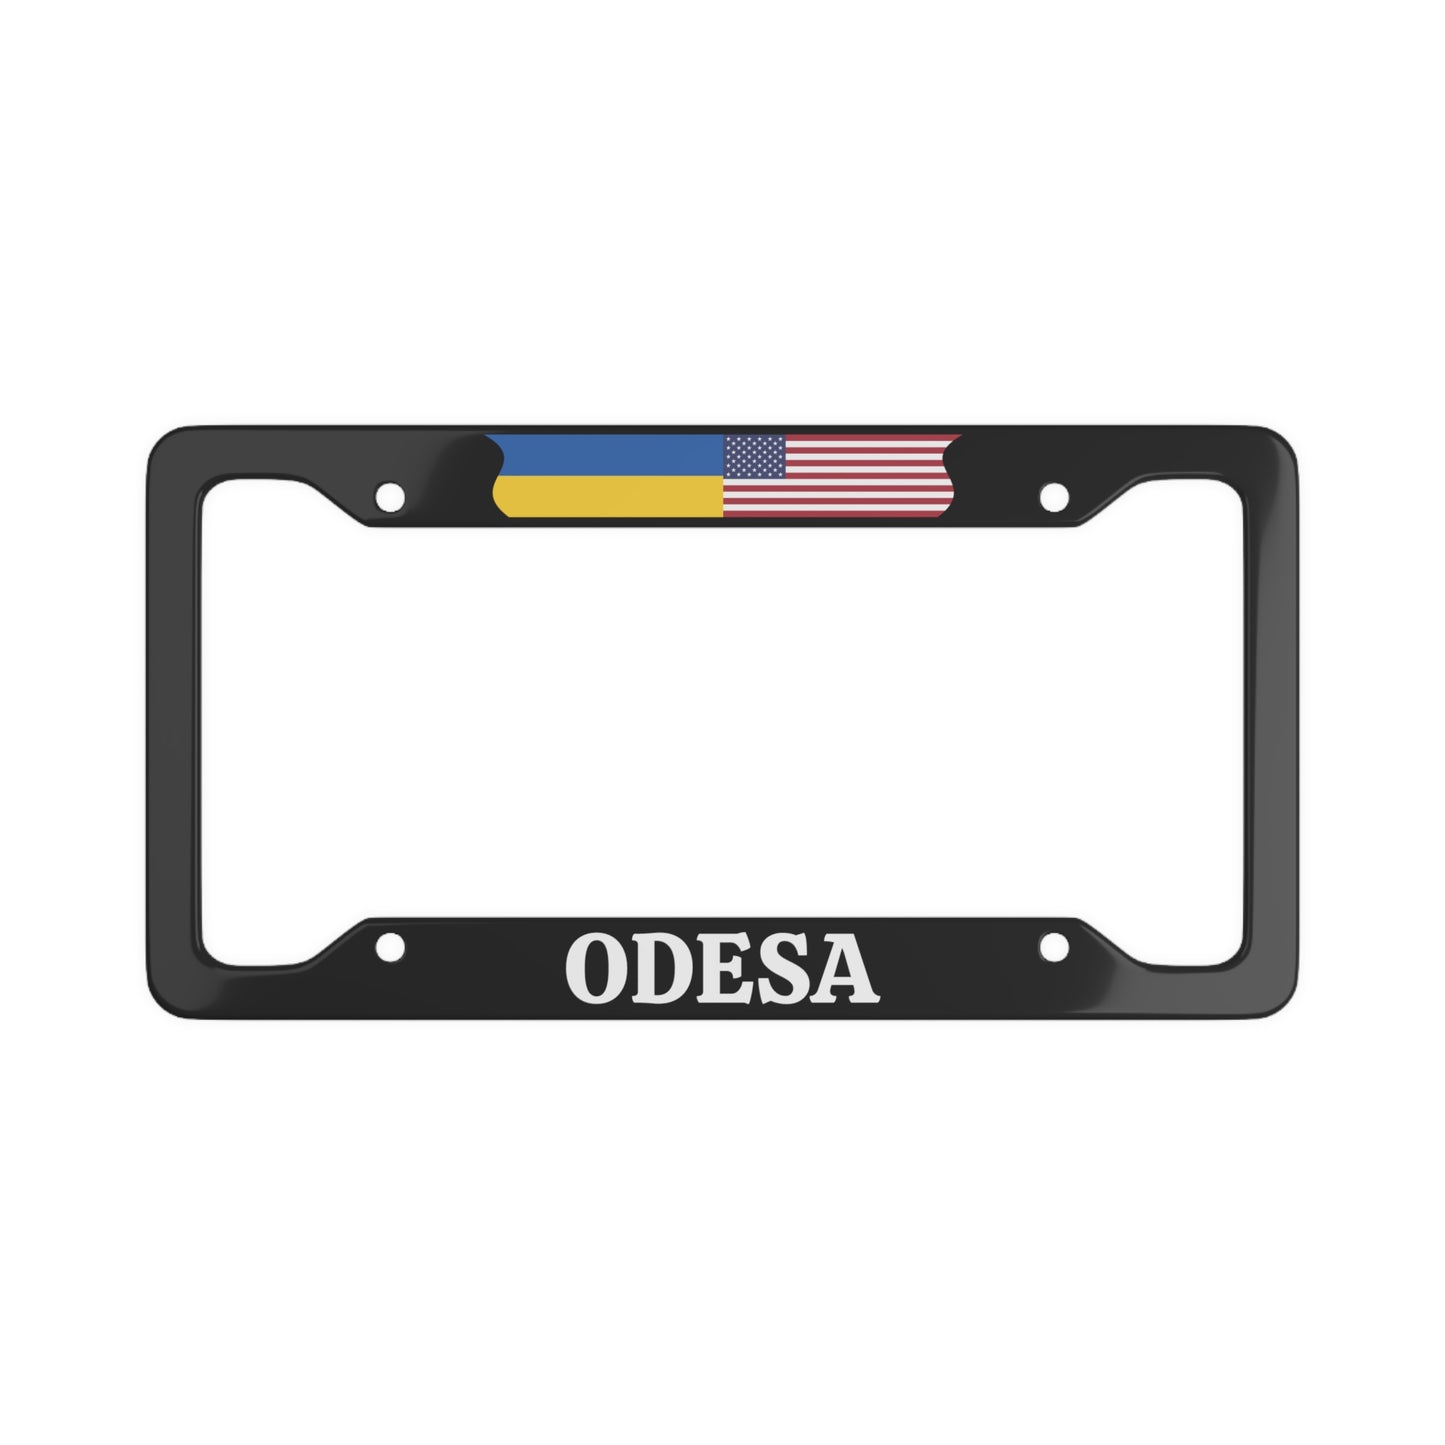 ODESA with flag License Plate Frame